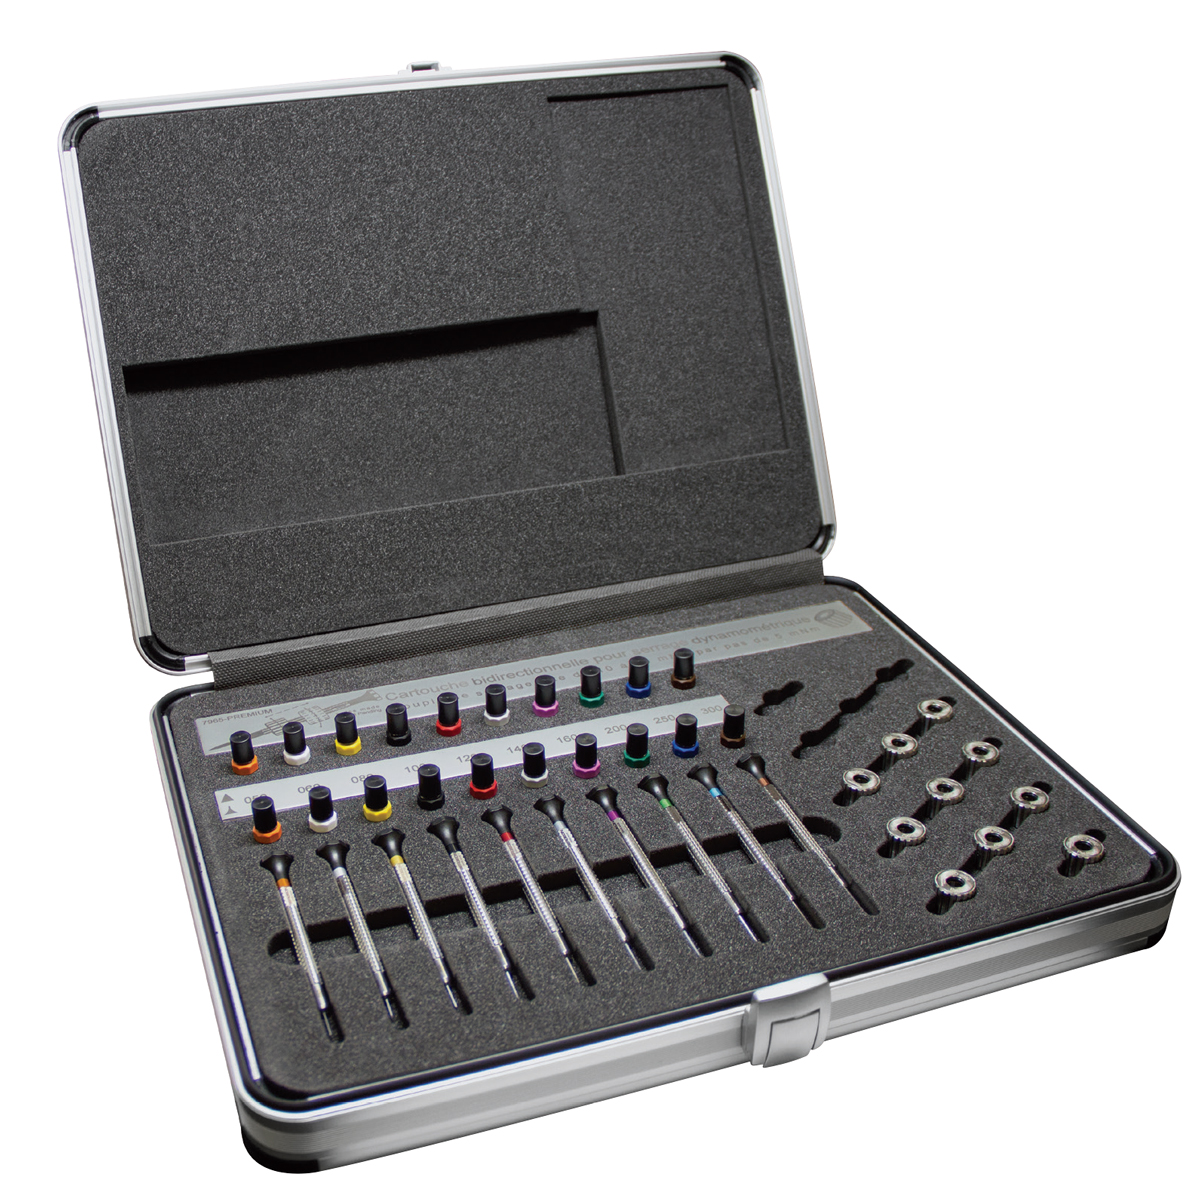 Bergeon 7965-Premium tool case made of aluminum with 10 screwdrivers, 10 tubes with replacement
blades in V-grinding (1 each) and 10 tubes with T-grinding (2 each) and 10 torque drums (Tork-Speed)